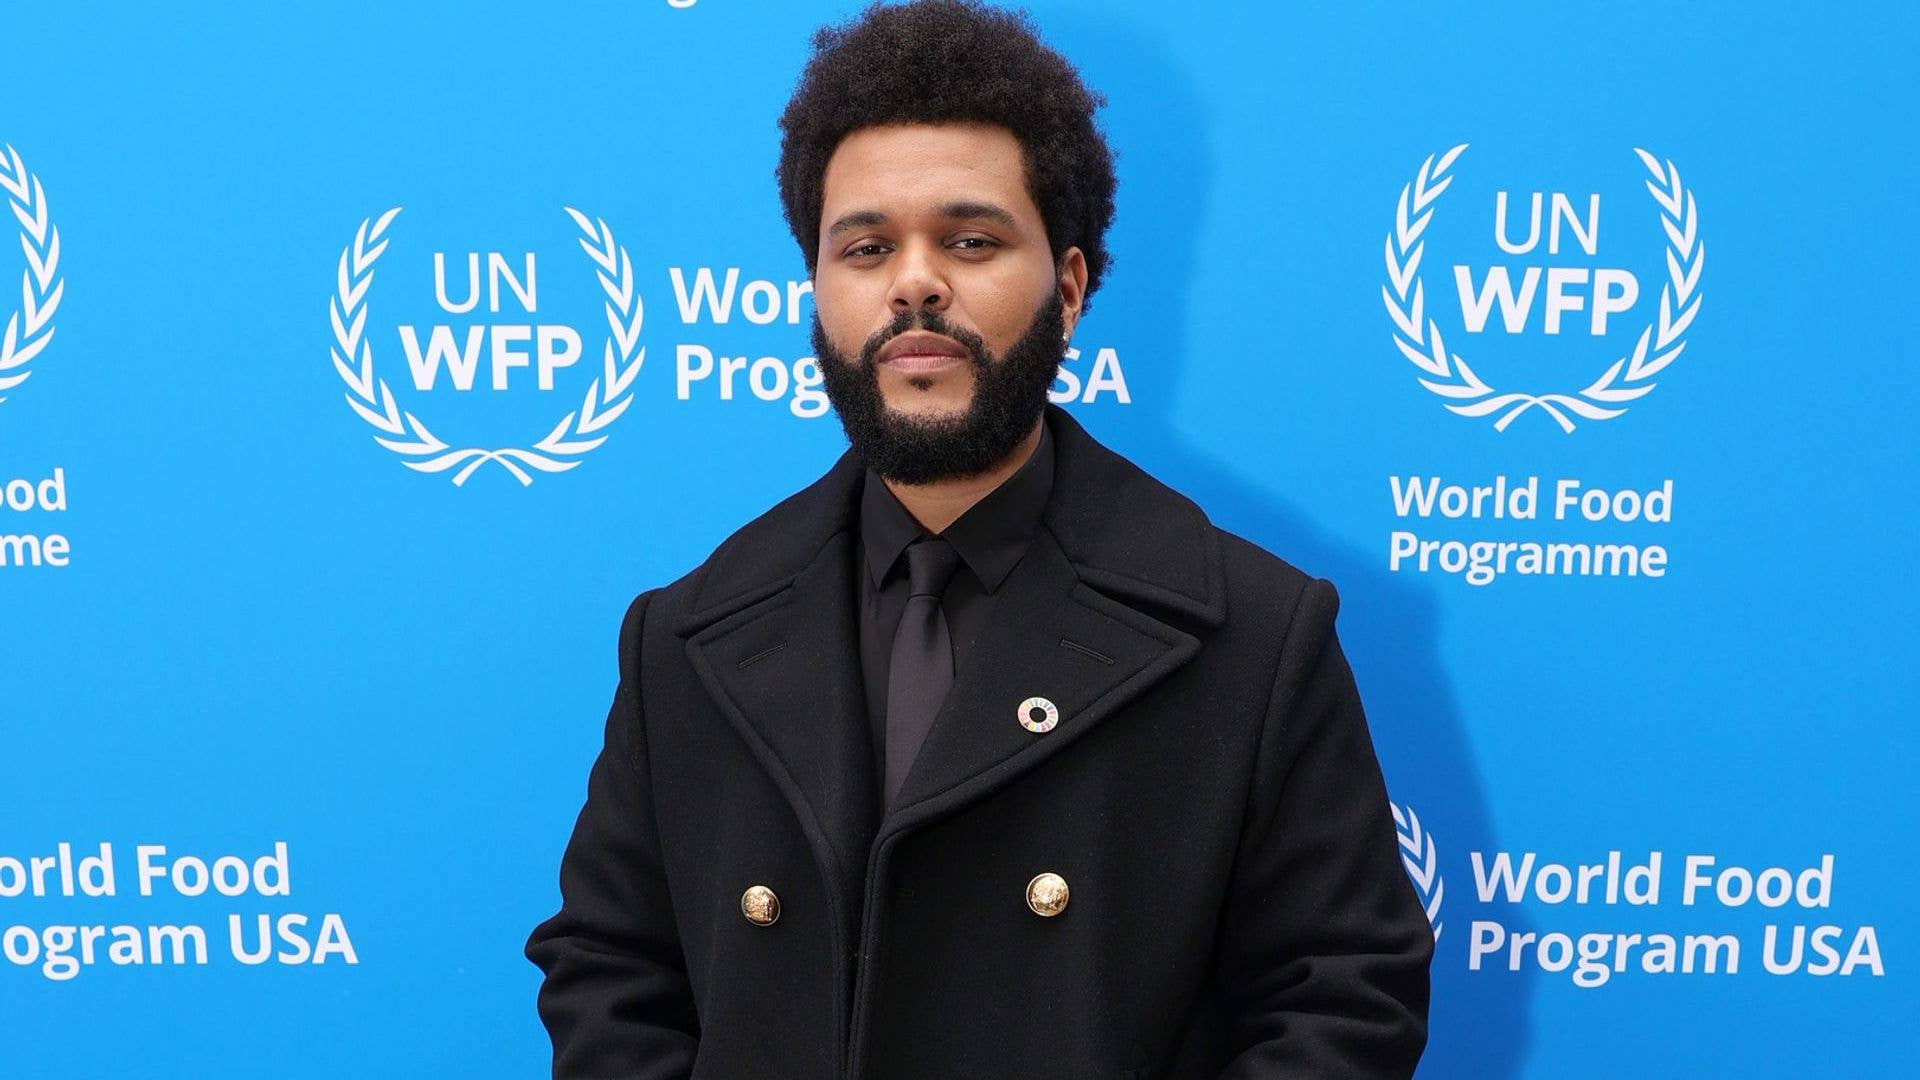 The Weeknd poses for the UN's World Food Programme